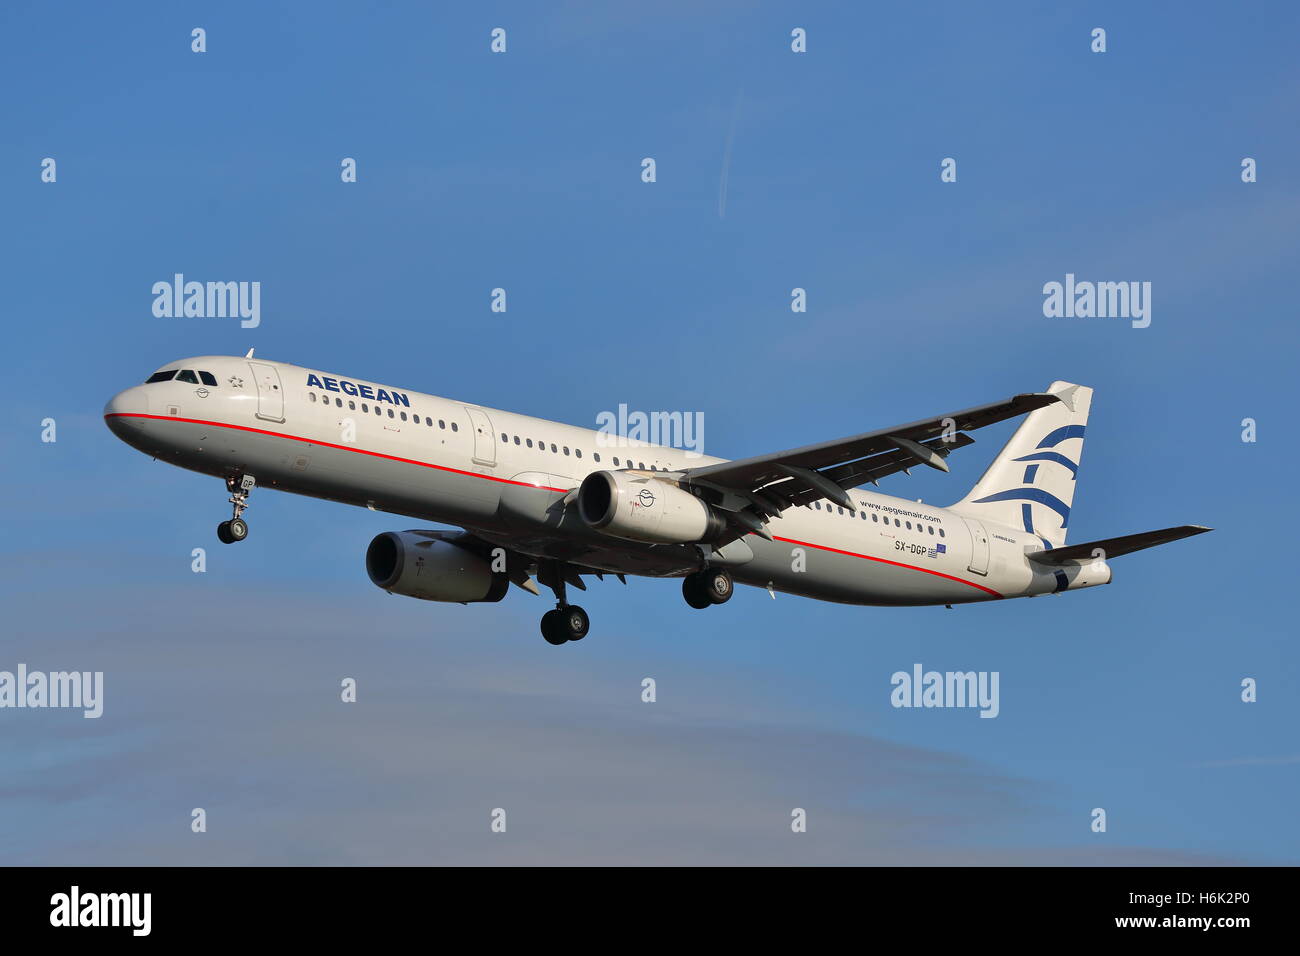 Aegean Airlines Airbus A321-200 SX-DGP landing at London Heathrow Airport, UK Stock Photo